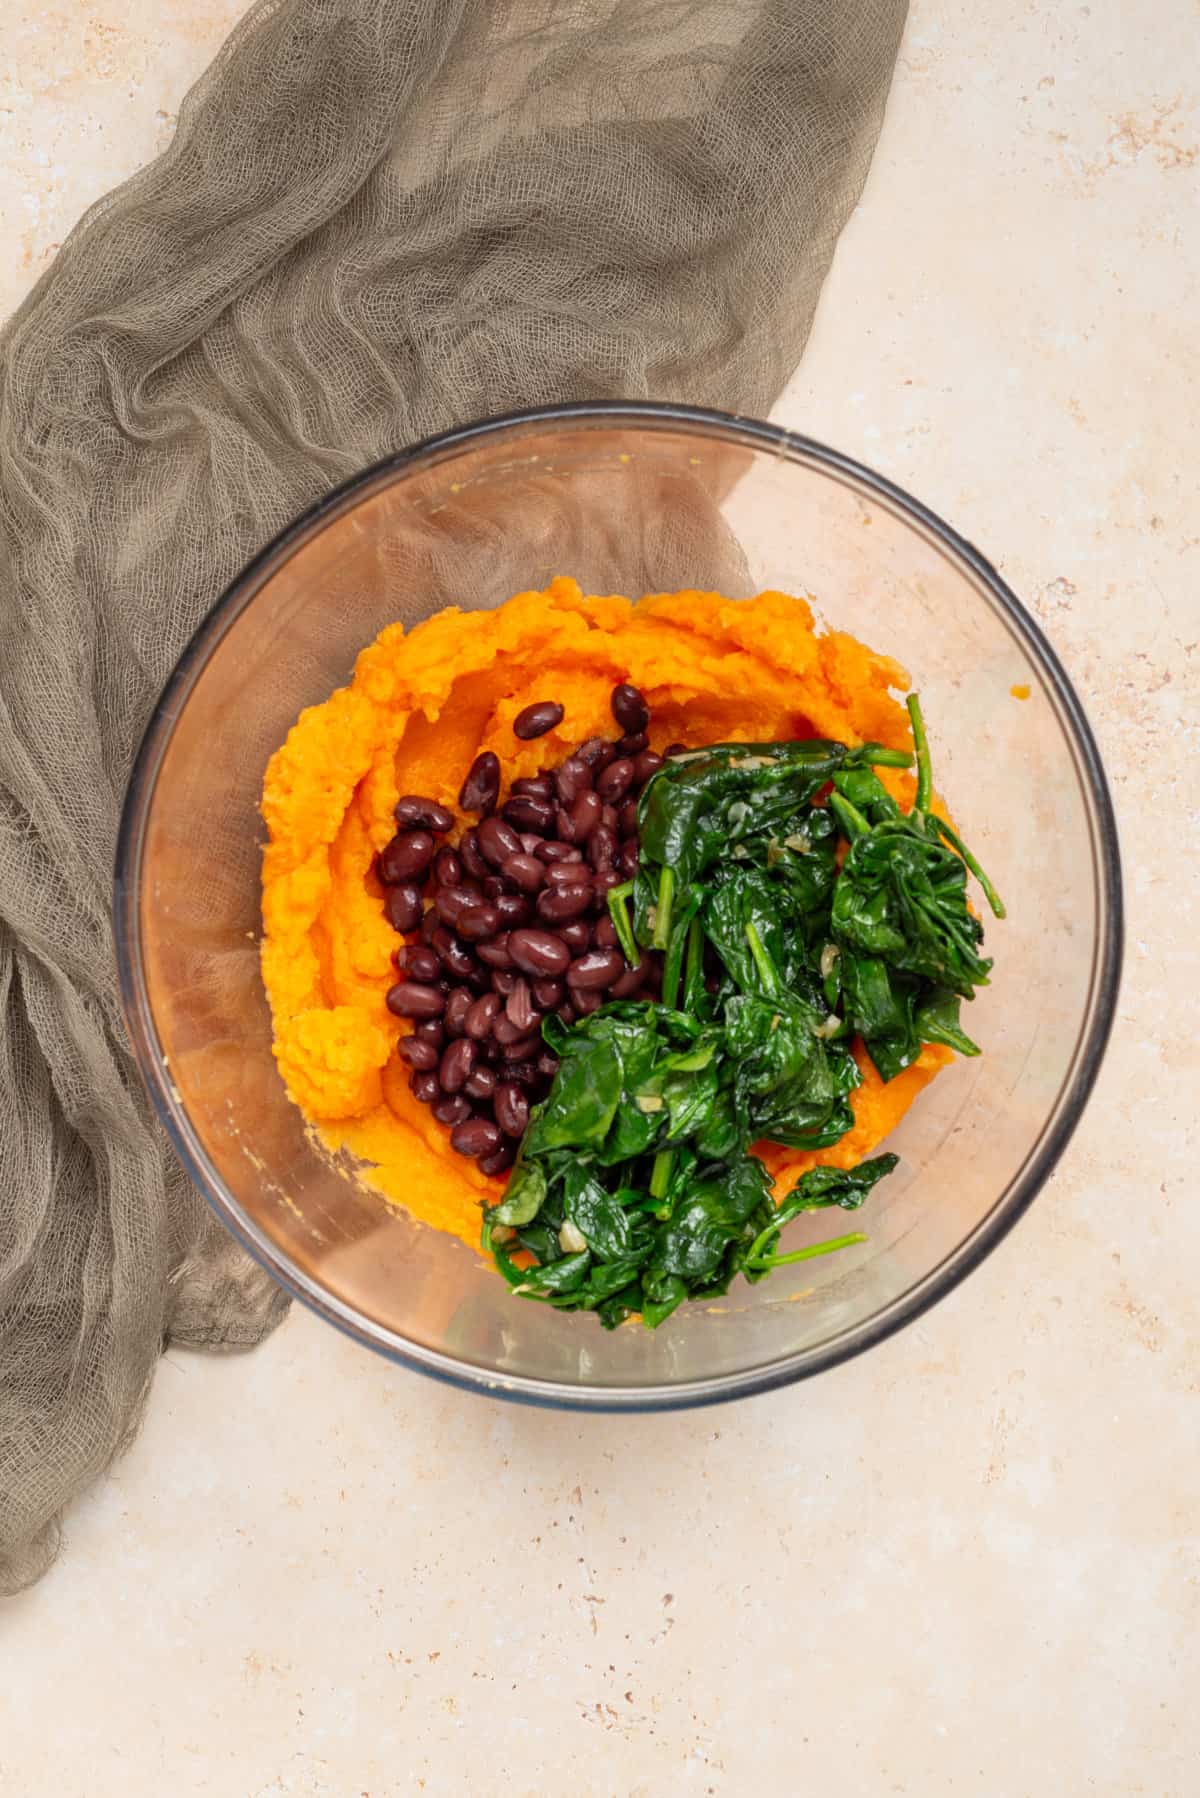 An image of sweet potato flesh, black beans, and spinach in a mixing bowl.